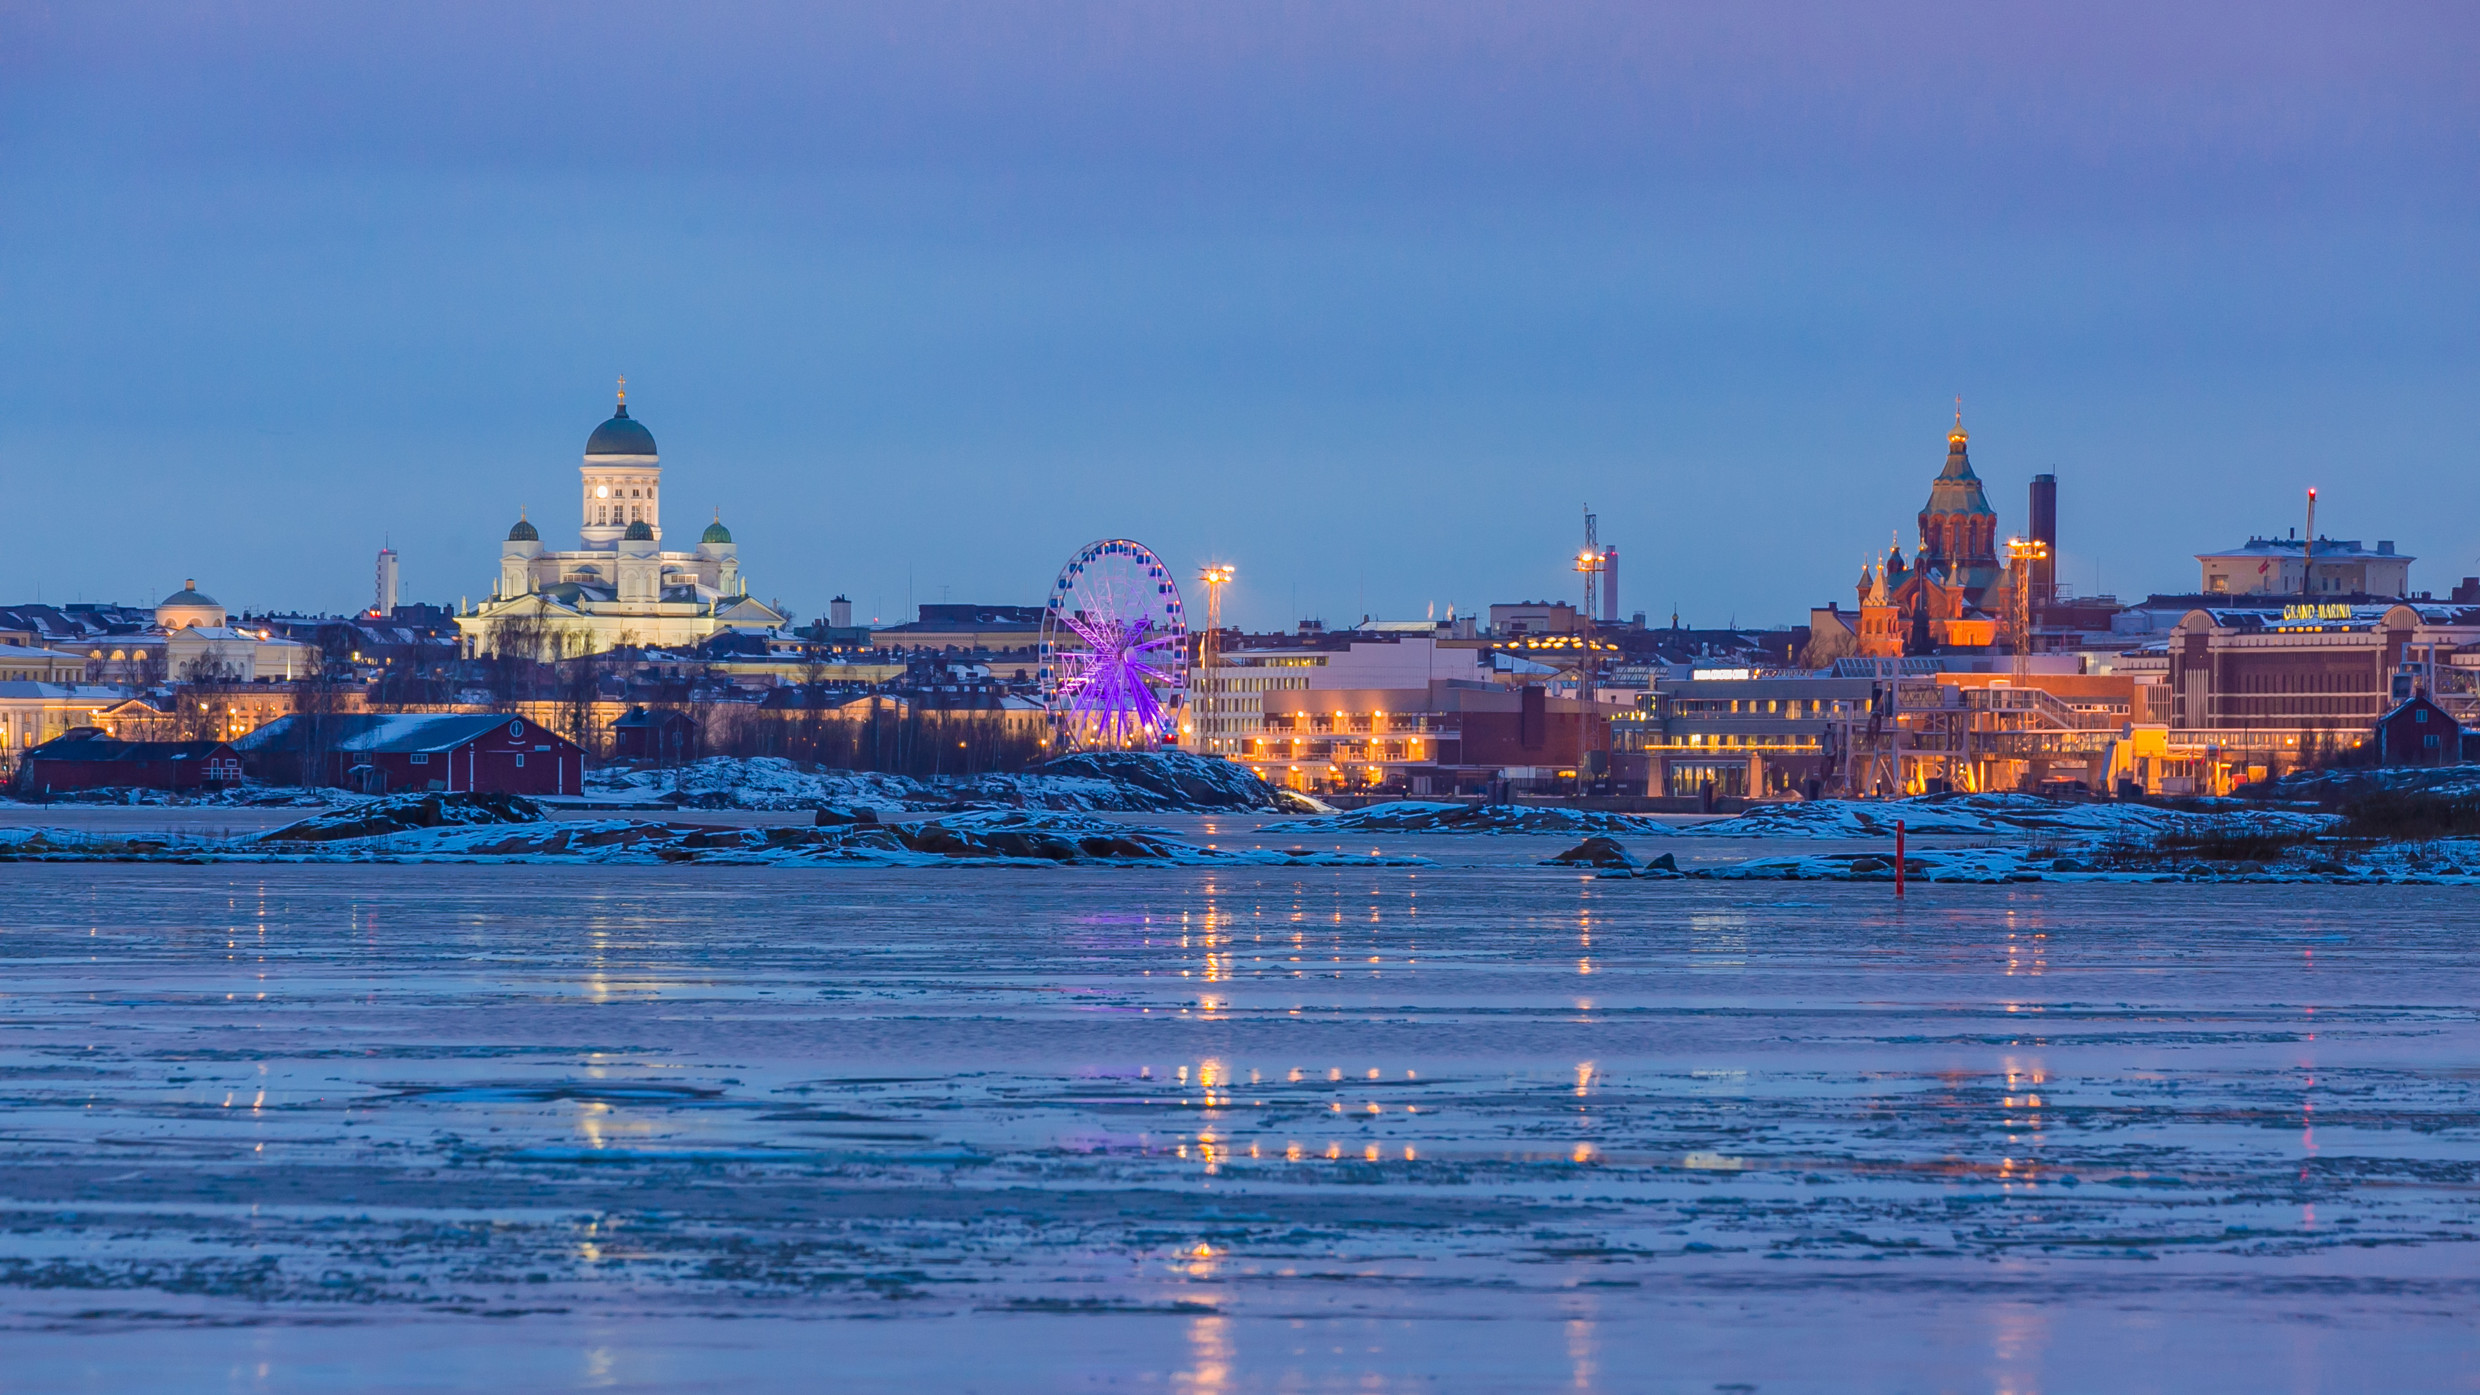 Helsinki Cathedral in the horizon, winter sea in the foreground